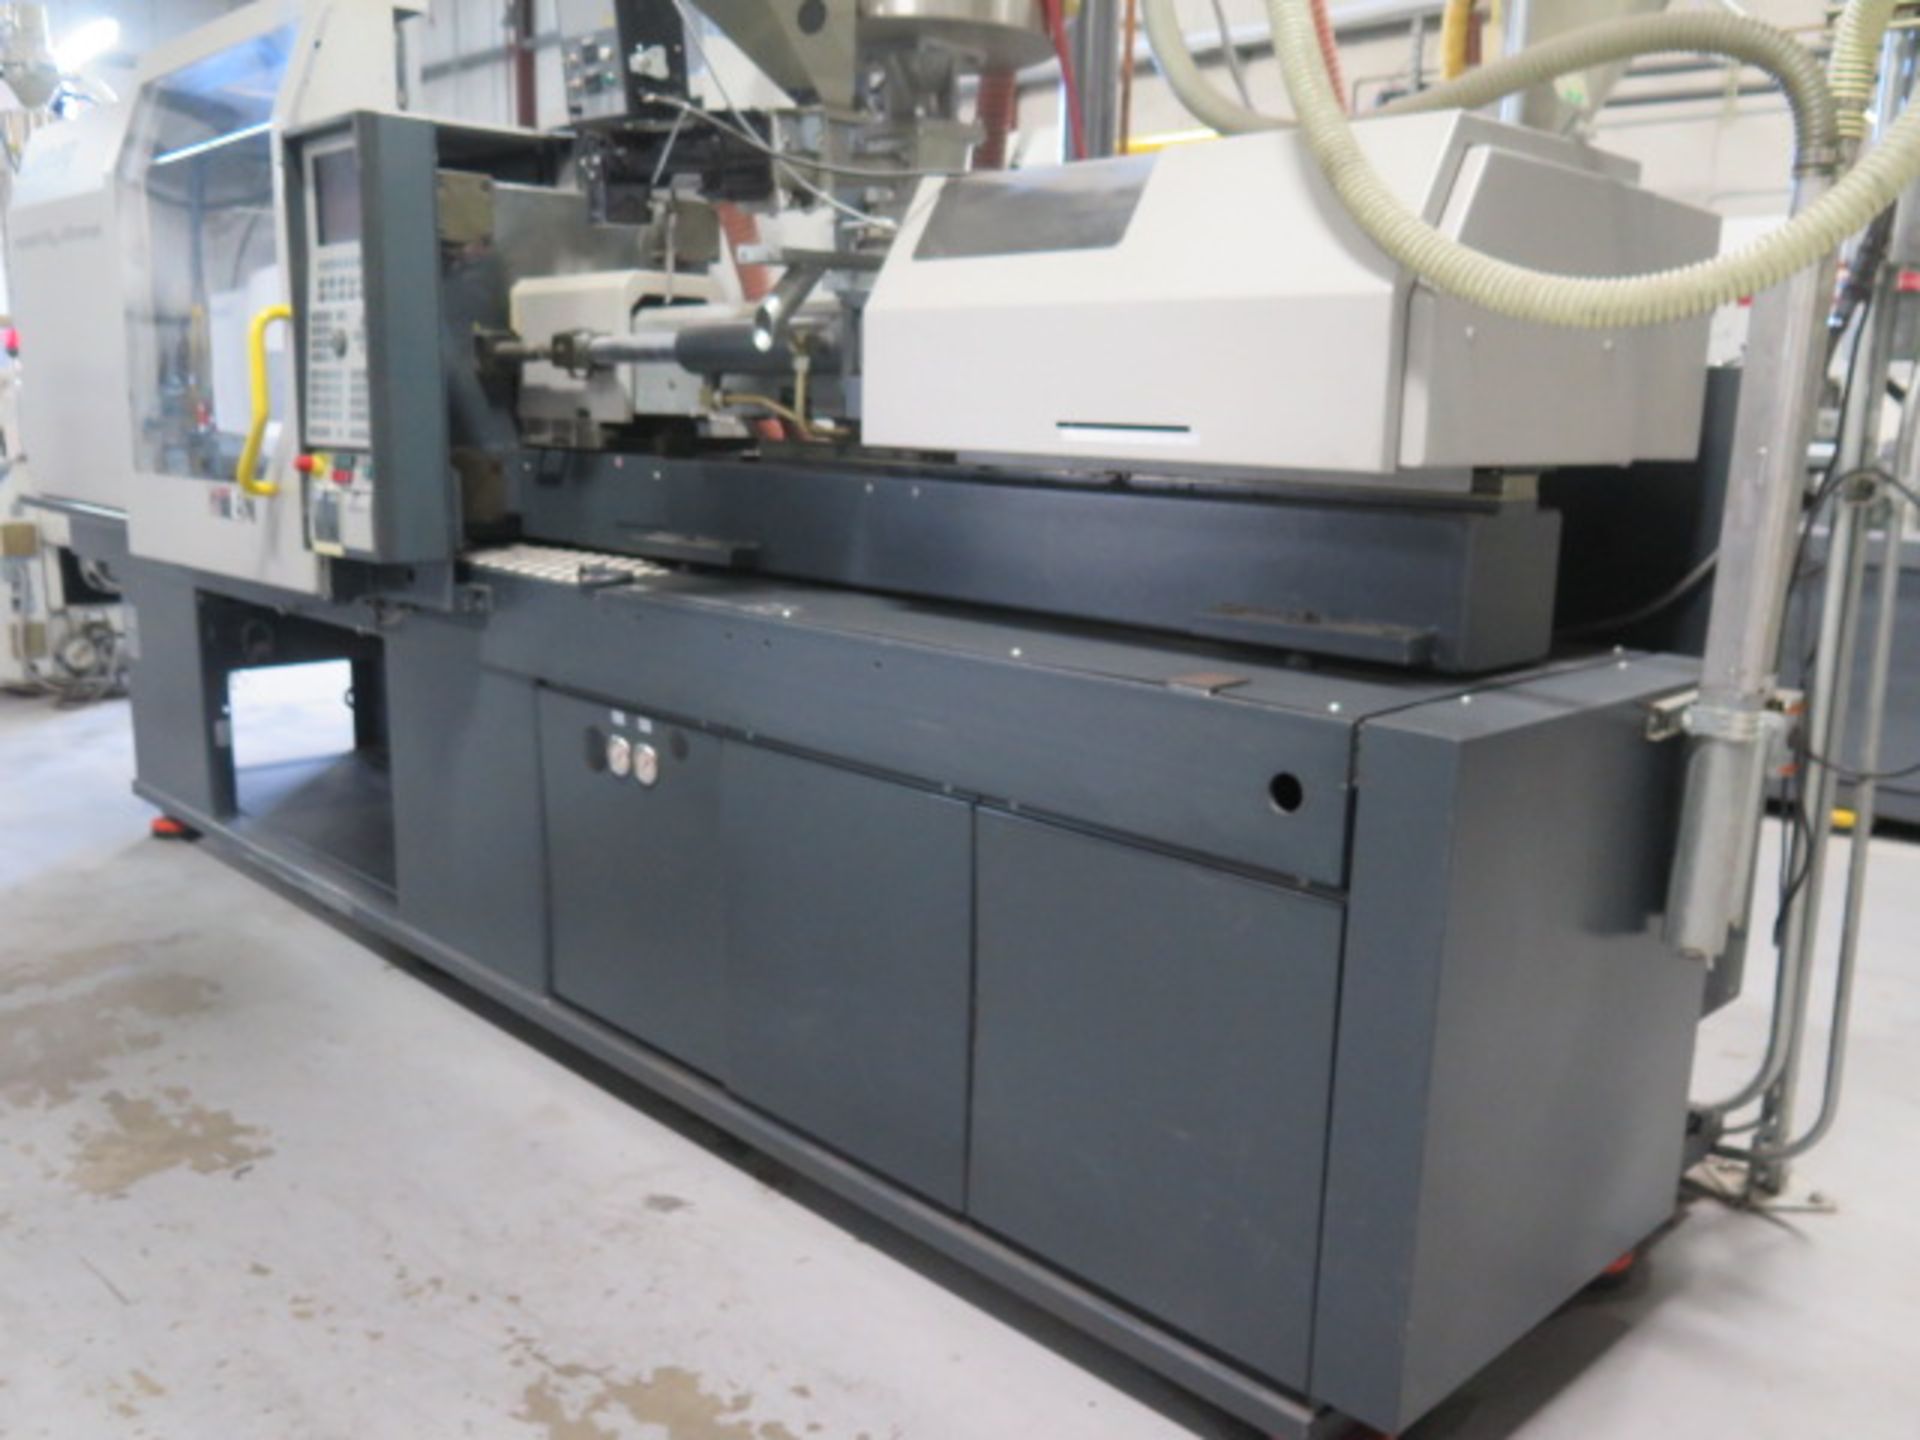 2000 Demag Ergotech Concept 1100/470-430 110-Ton Plastic Injection Molding s/n 7173-0068, SOLD AS IS - Image 3 of 16